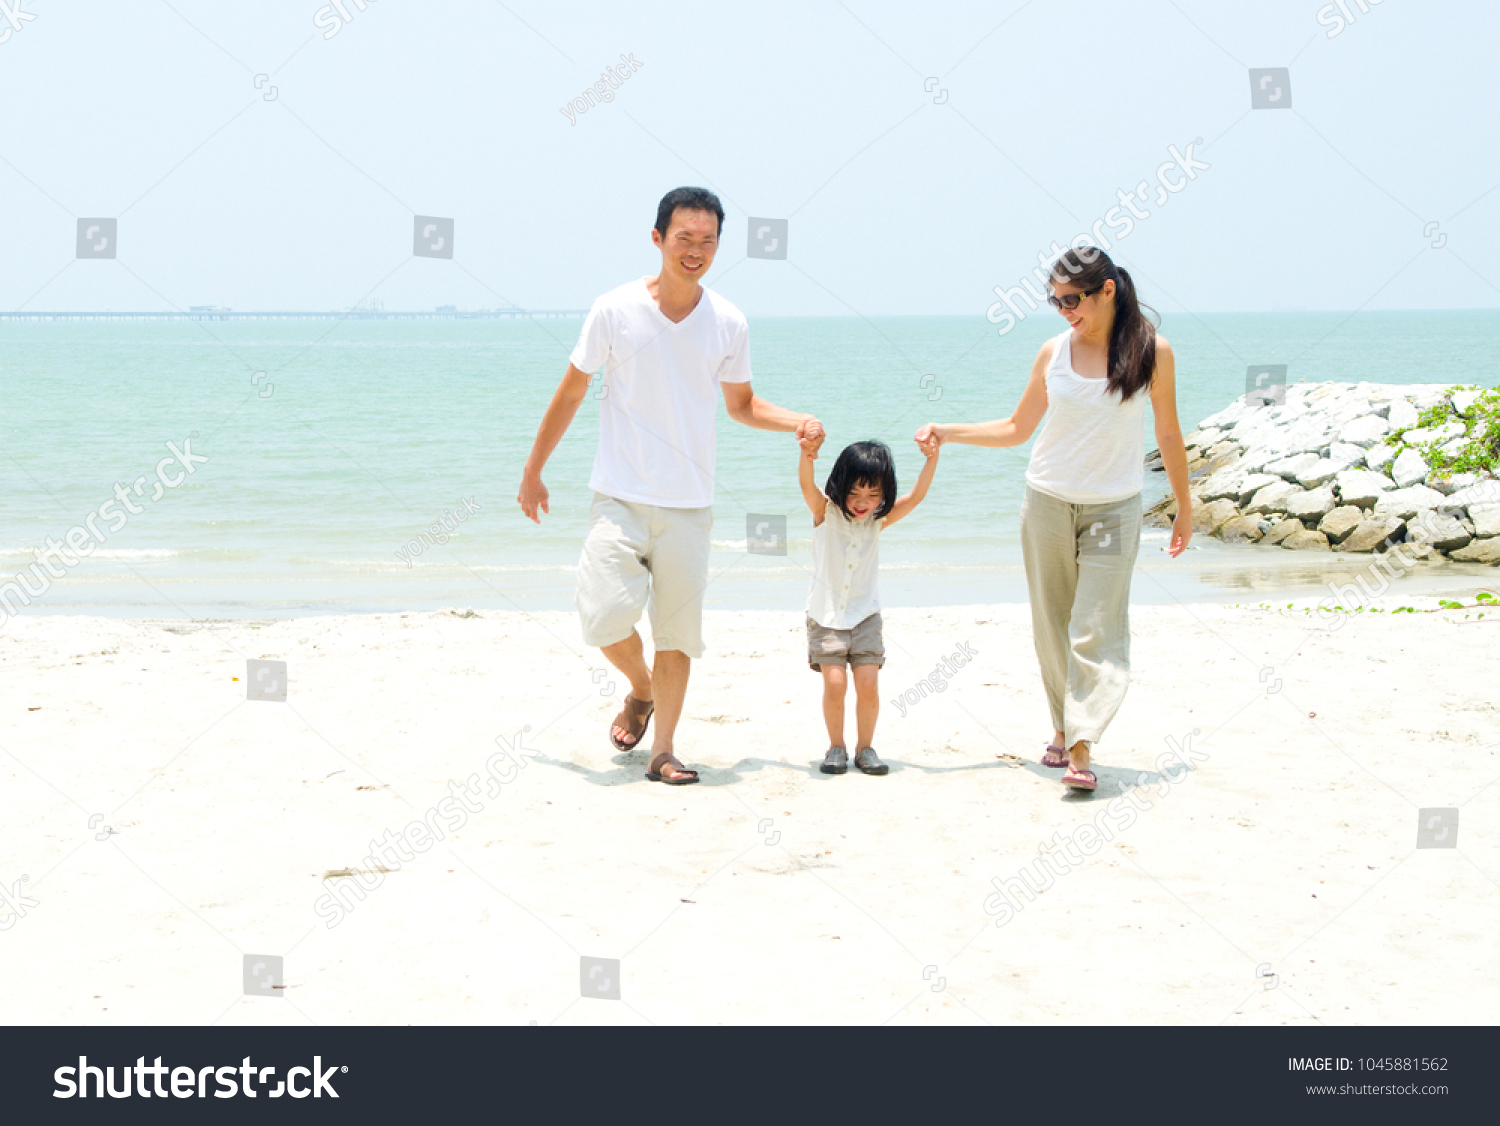 Happy family having fun at beach during summer day #1045881562